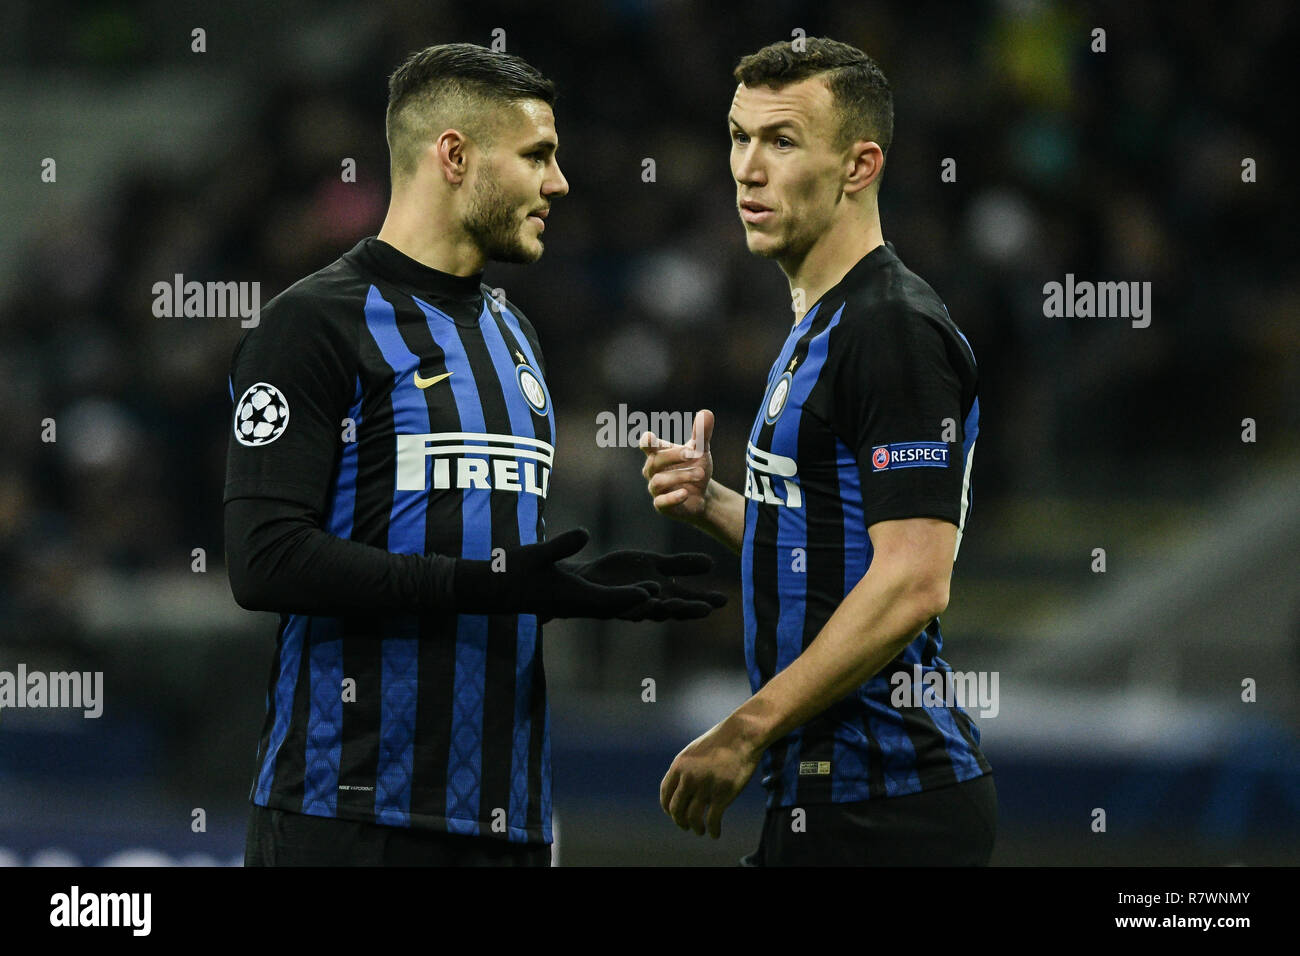 Milan, Italy. 11th December, 2018. Forward Mauro Icardi (Inter) and Midfielder Ivan Perisic (Inter) talk and gesture during the UEFA Champions League football match, Inter Milan vs PSV Eindhoven at San Siro Meazza Stadium in Milan, Italy on 11 December 2018 Credit: Piero Cruciatti/Alamy Live News Stock Photo